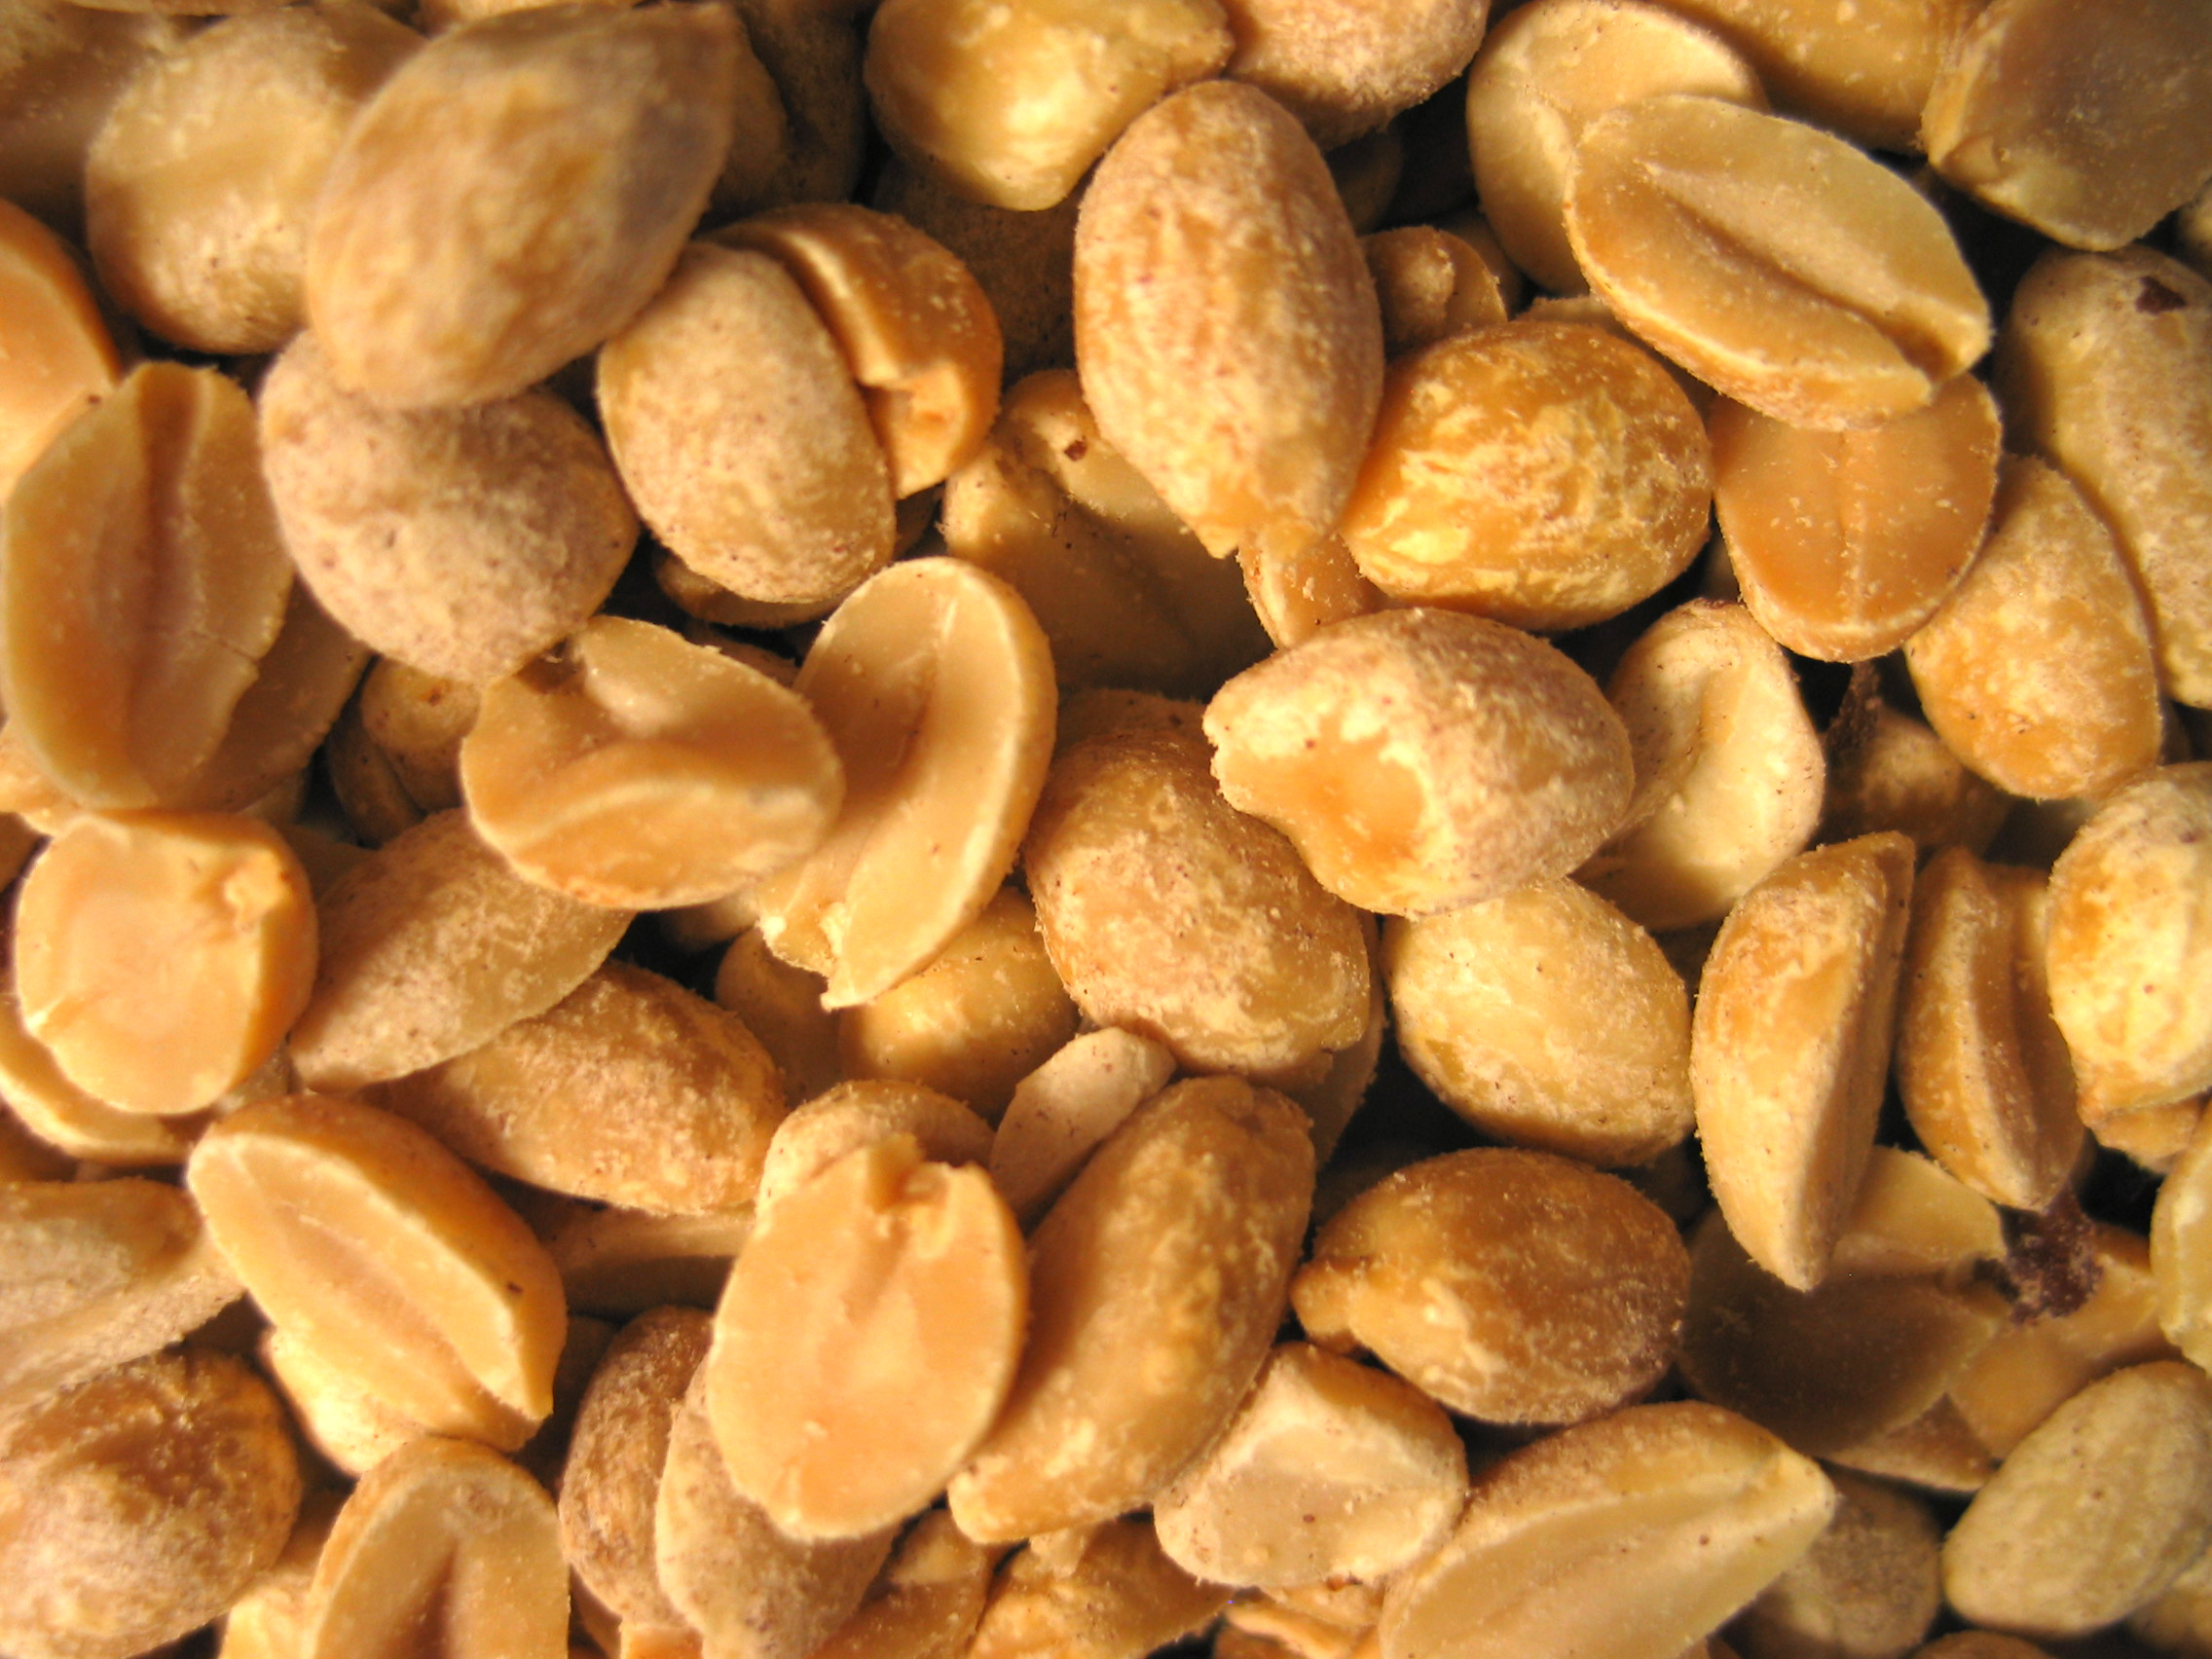 Peanuts aren't really a type of nut.